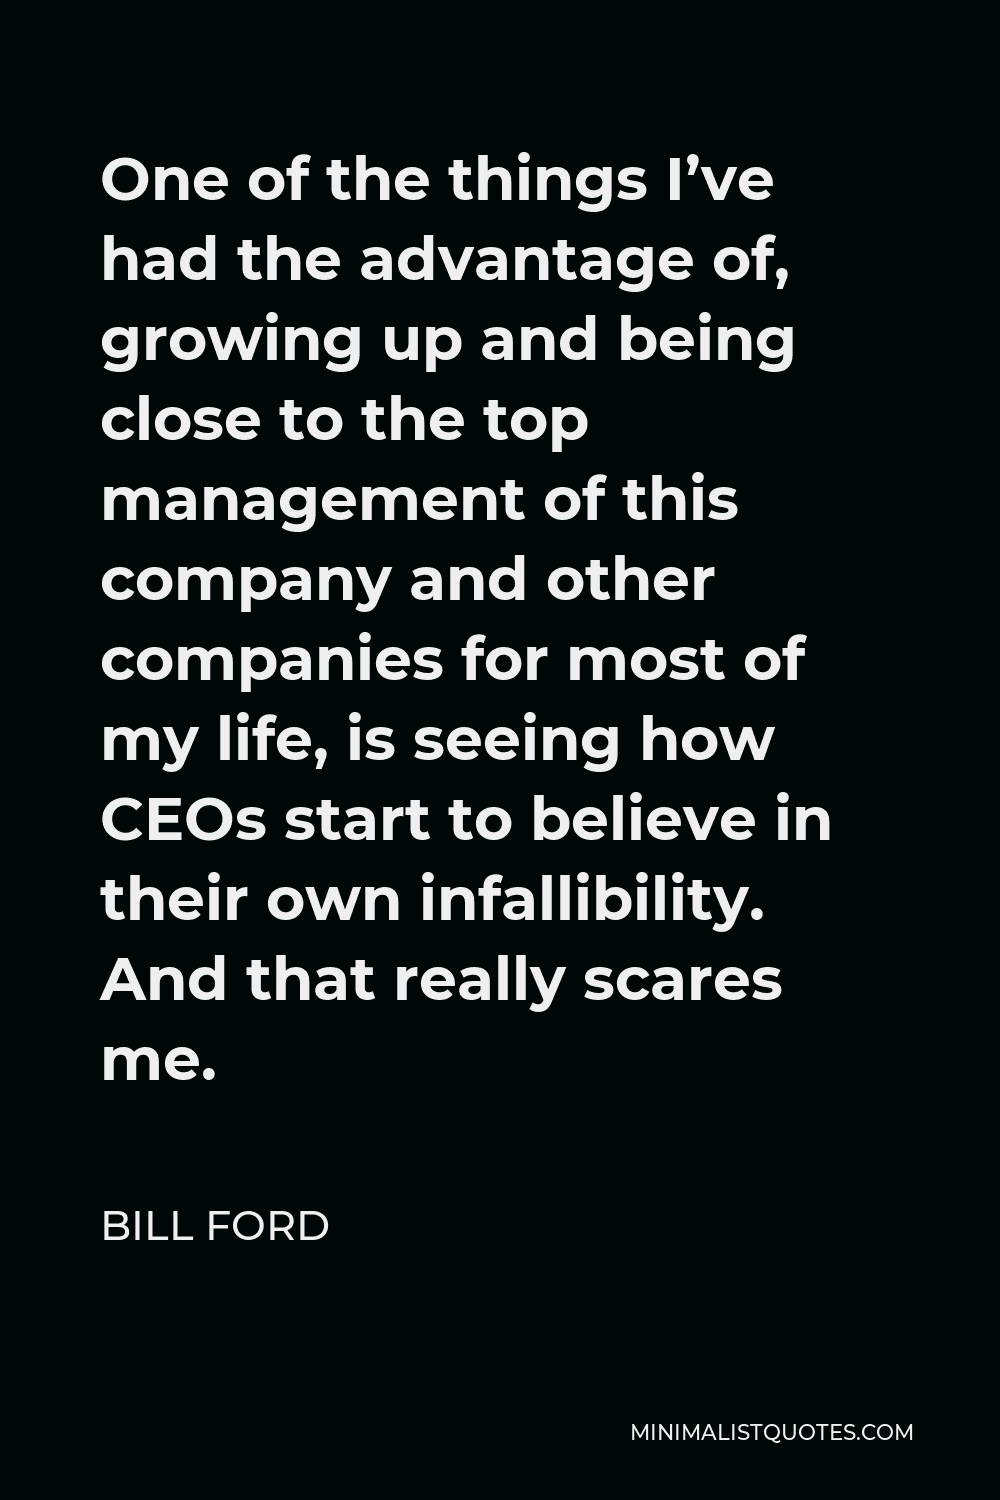 Bill Ford Quote - One of the things I’ve had the advantage of, growing up and being close to the top management of this company and other companies for most of my life, is seeing how CEOs start to believe in their own infallibility. And that really scares me.